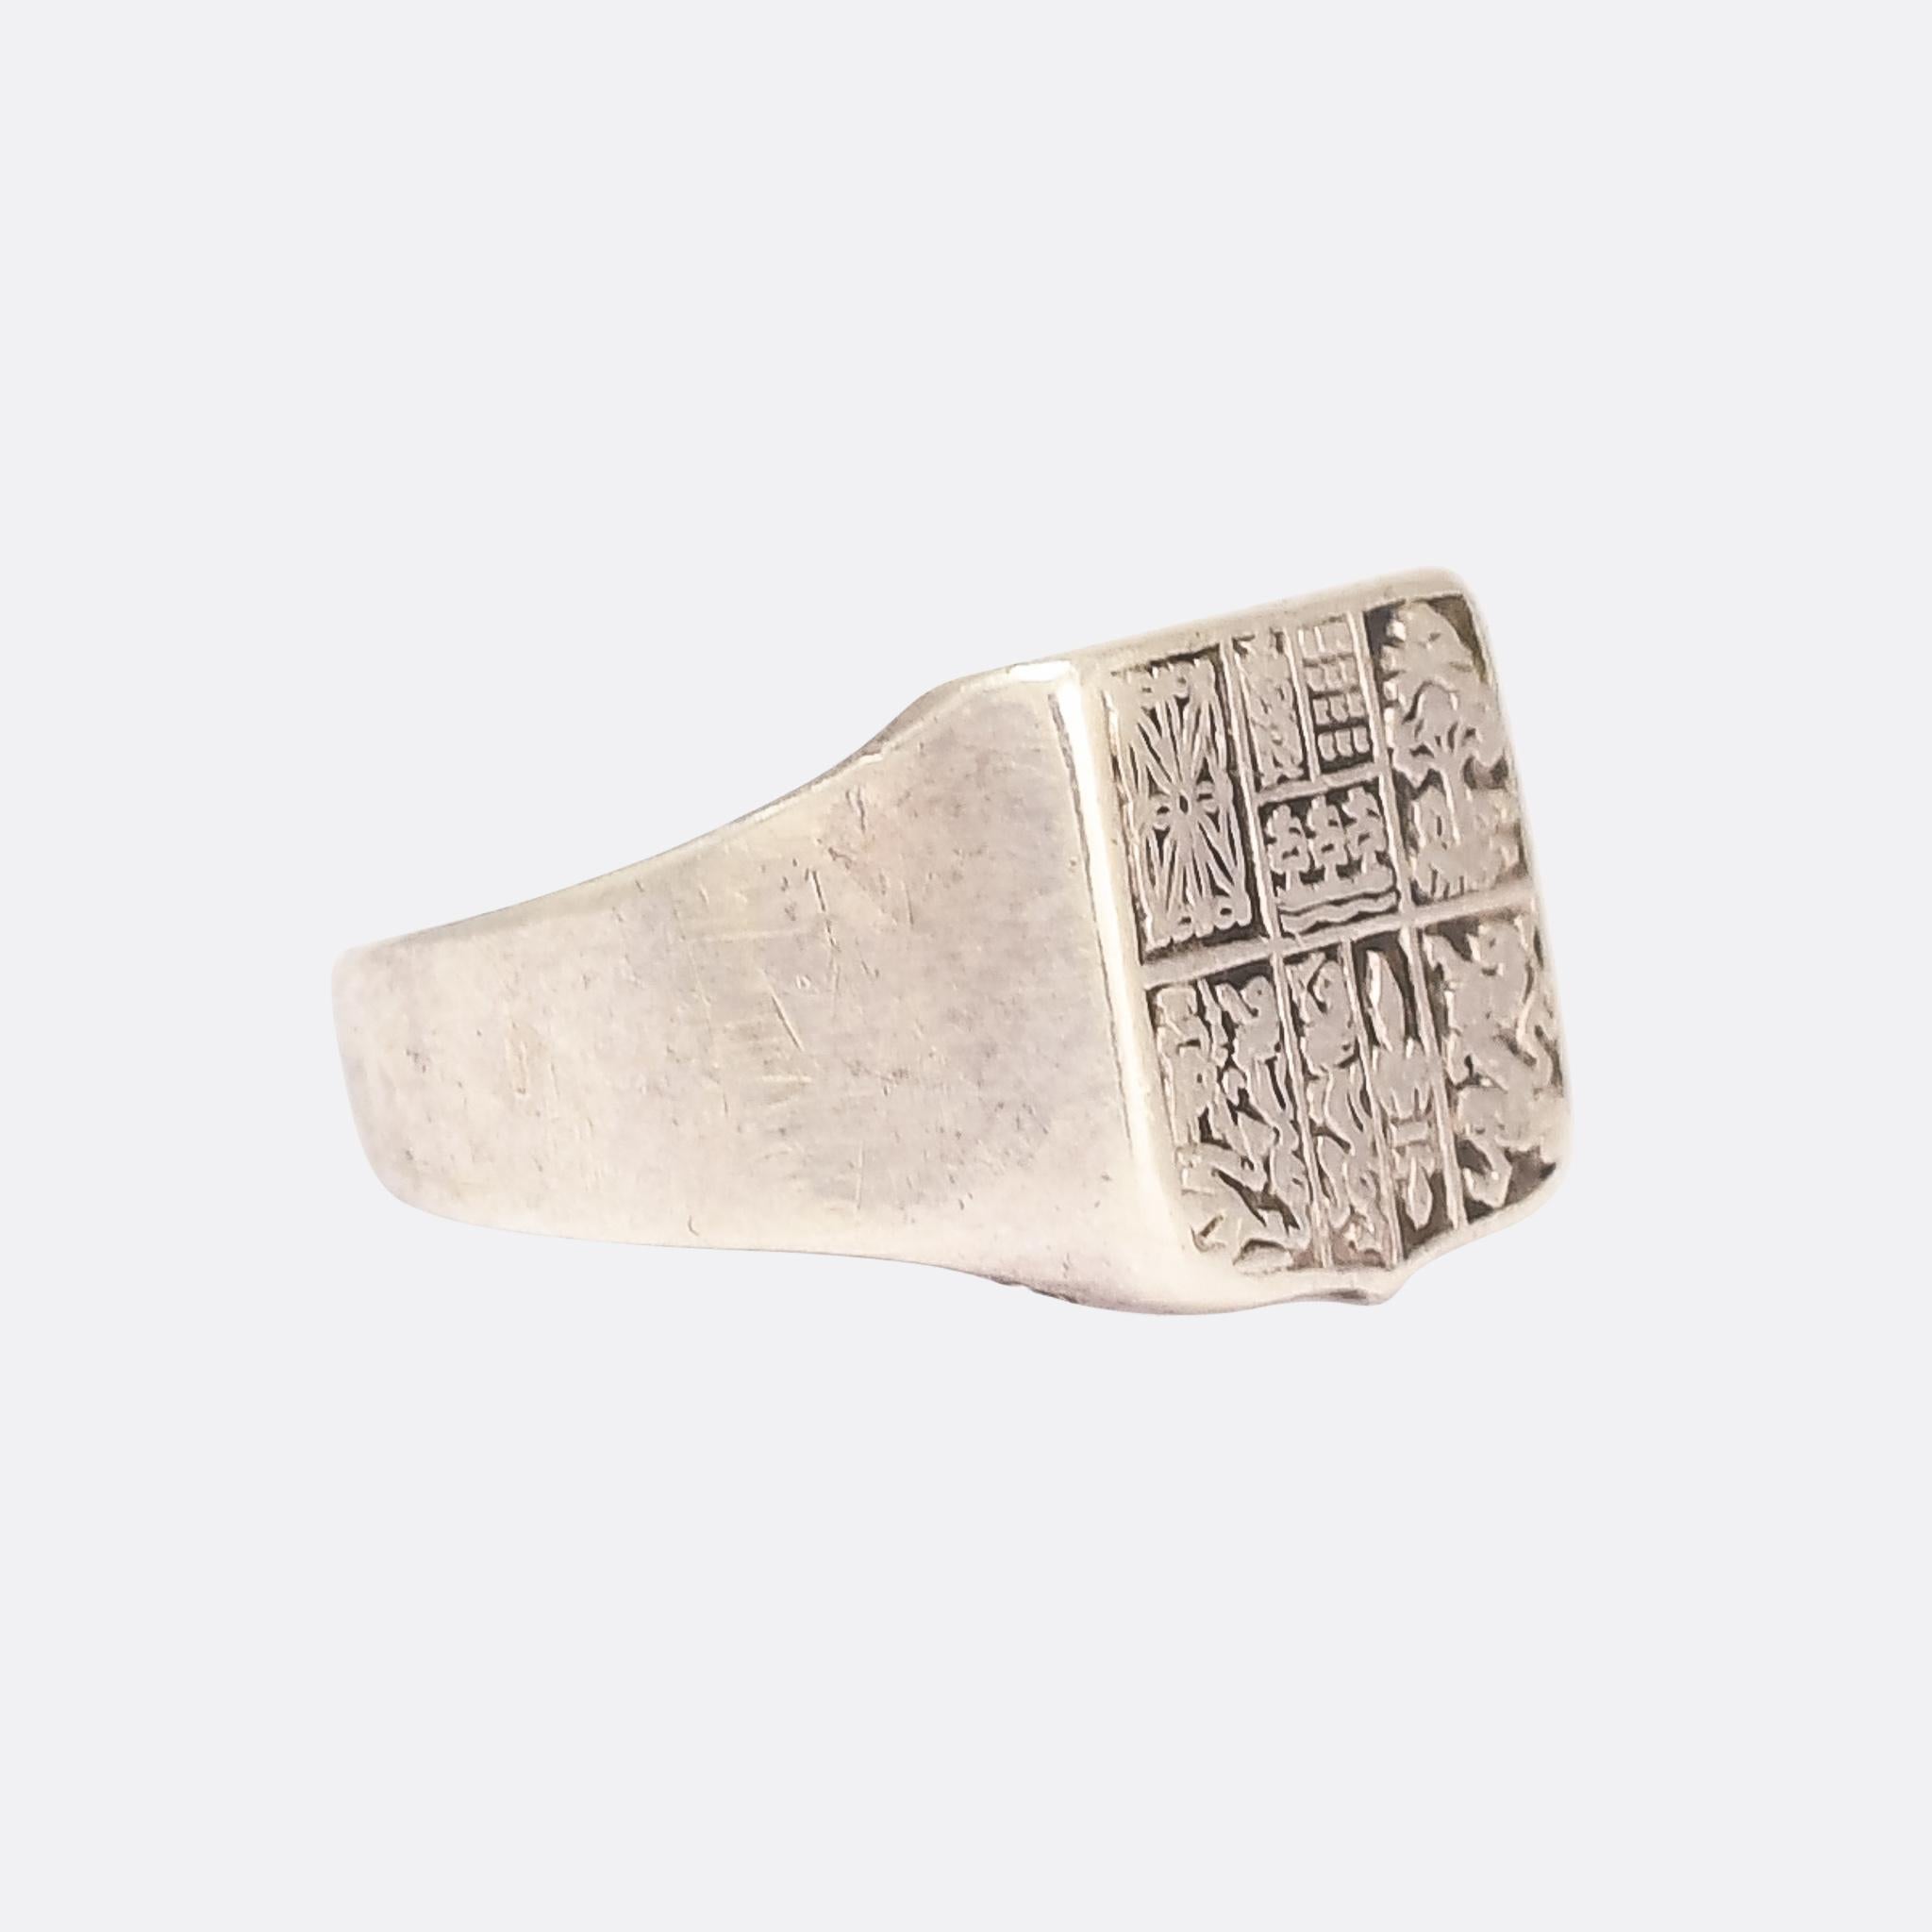 A cool antique signet ring with an intriguing backstory... The words engraved under the head really give it away tbh... ZAZPIAK BAK, which translates literally as 